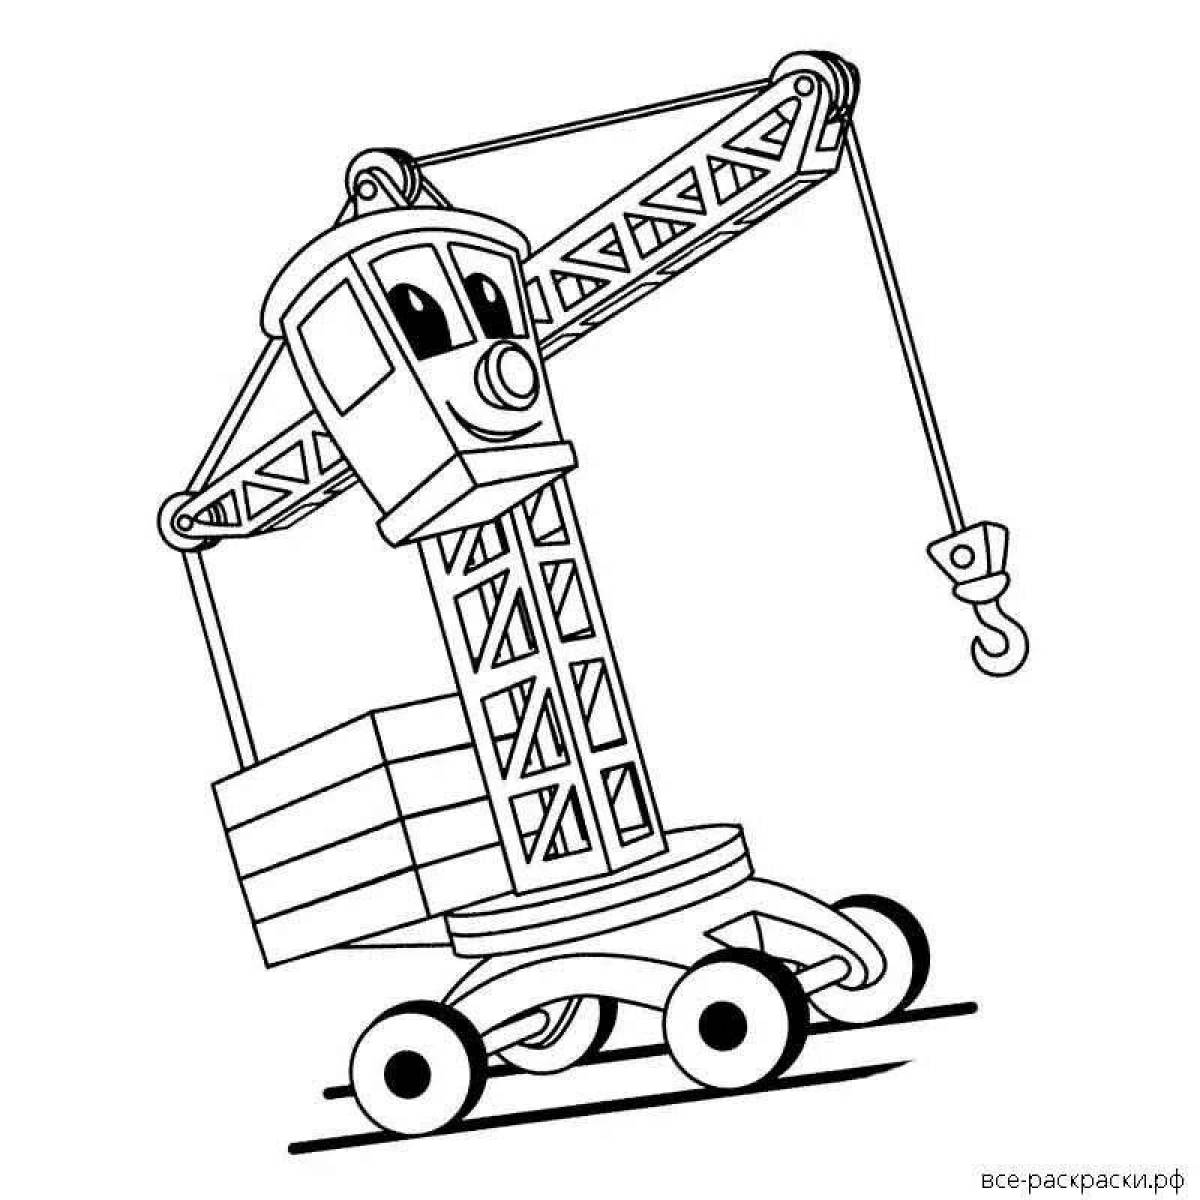 Colorful crane coloring page for kids